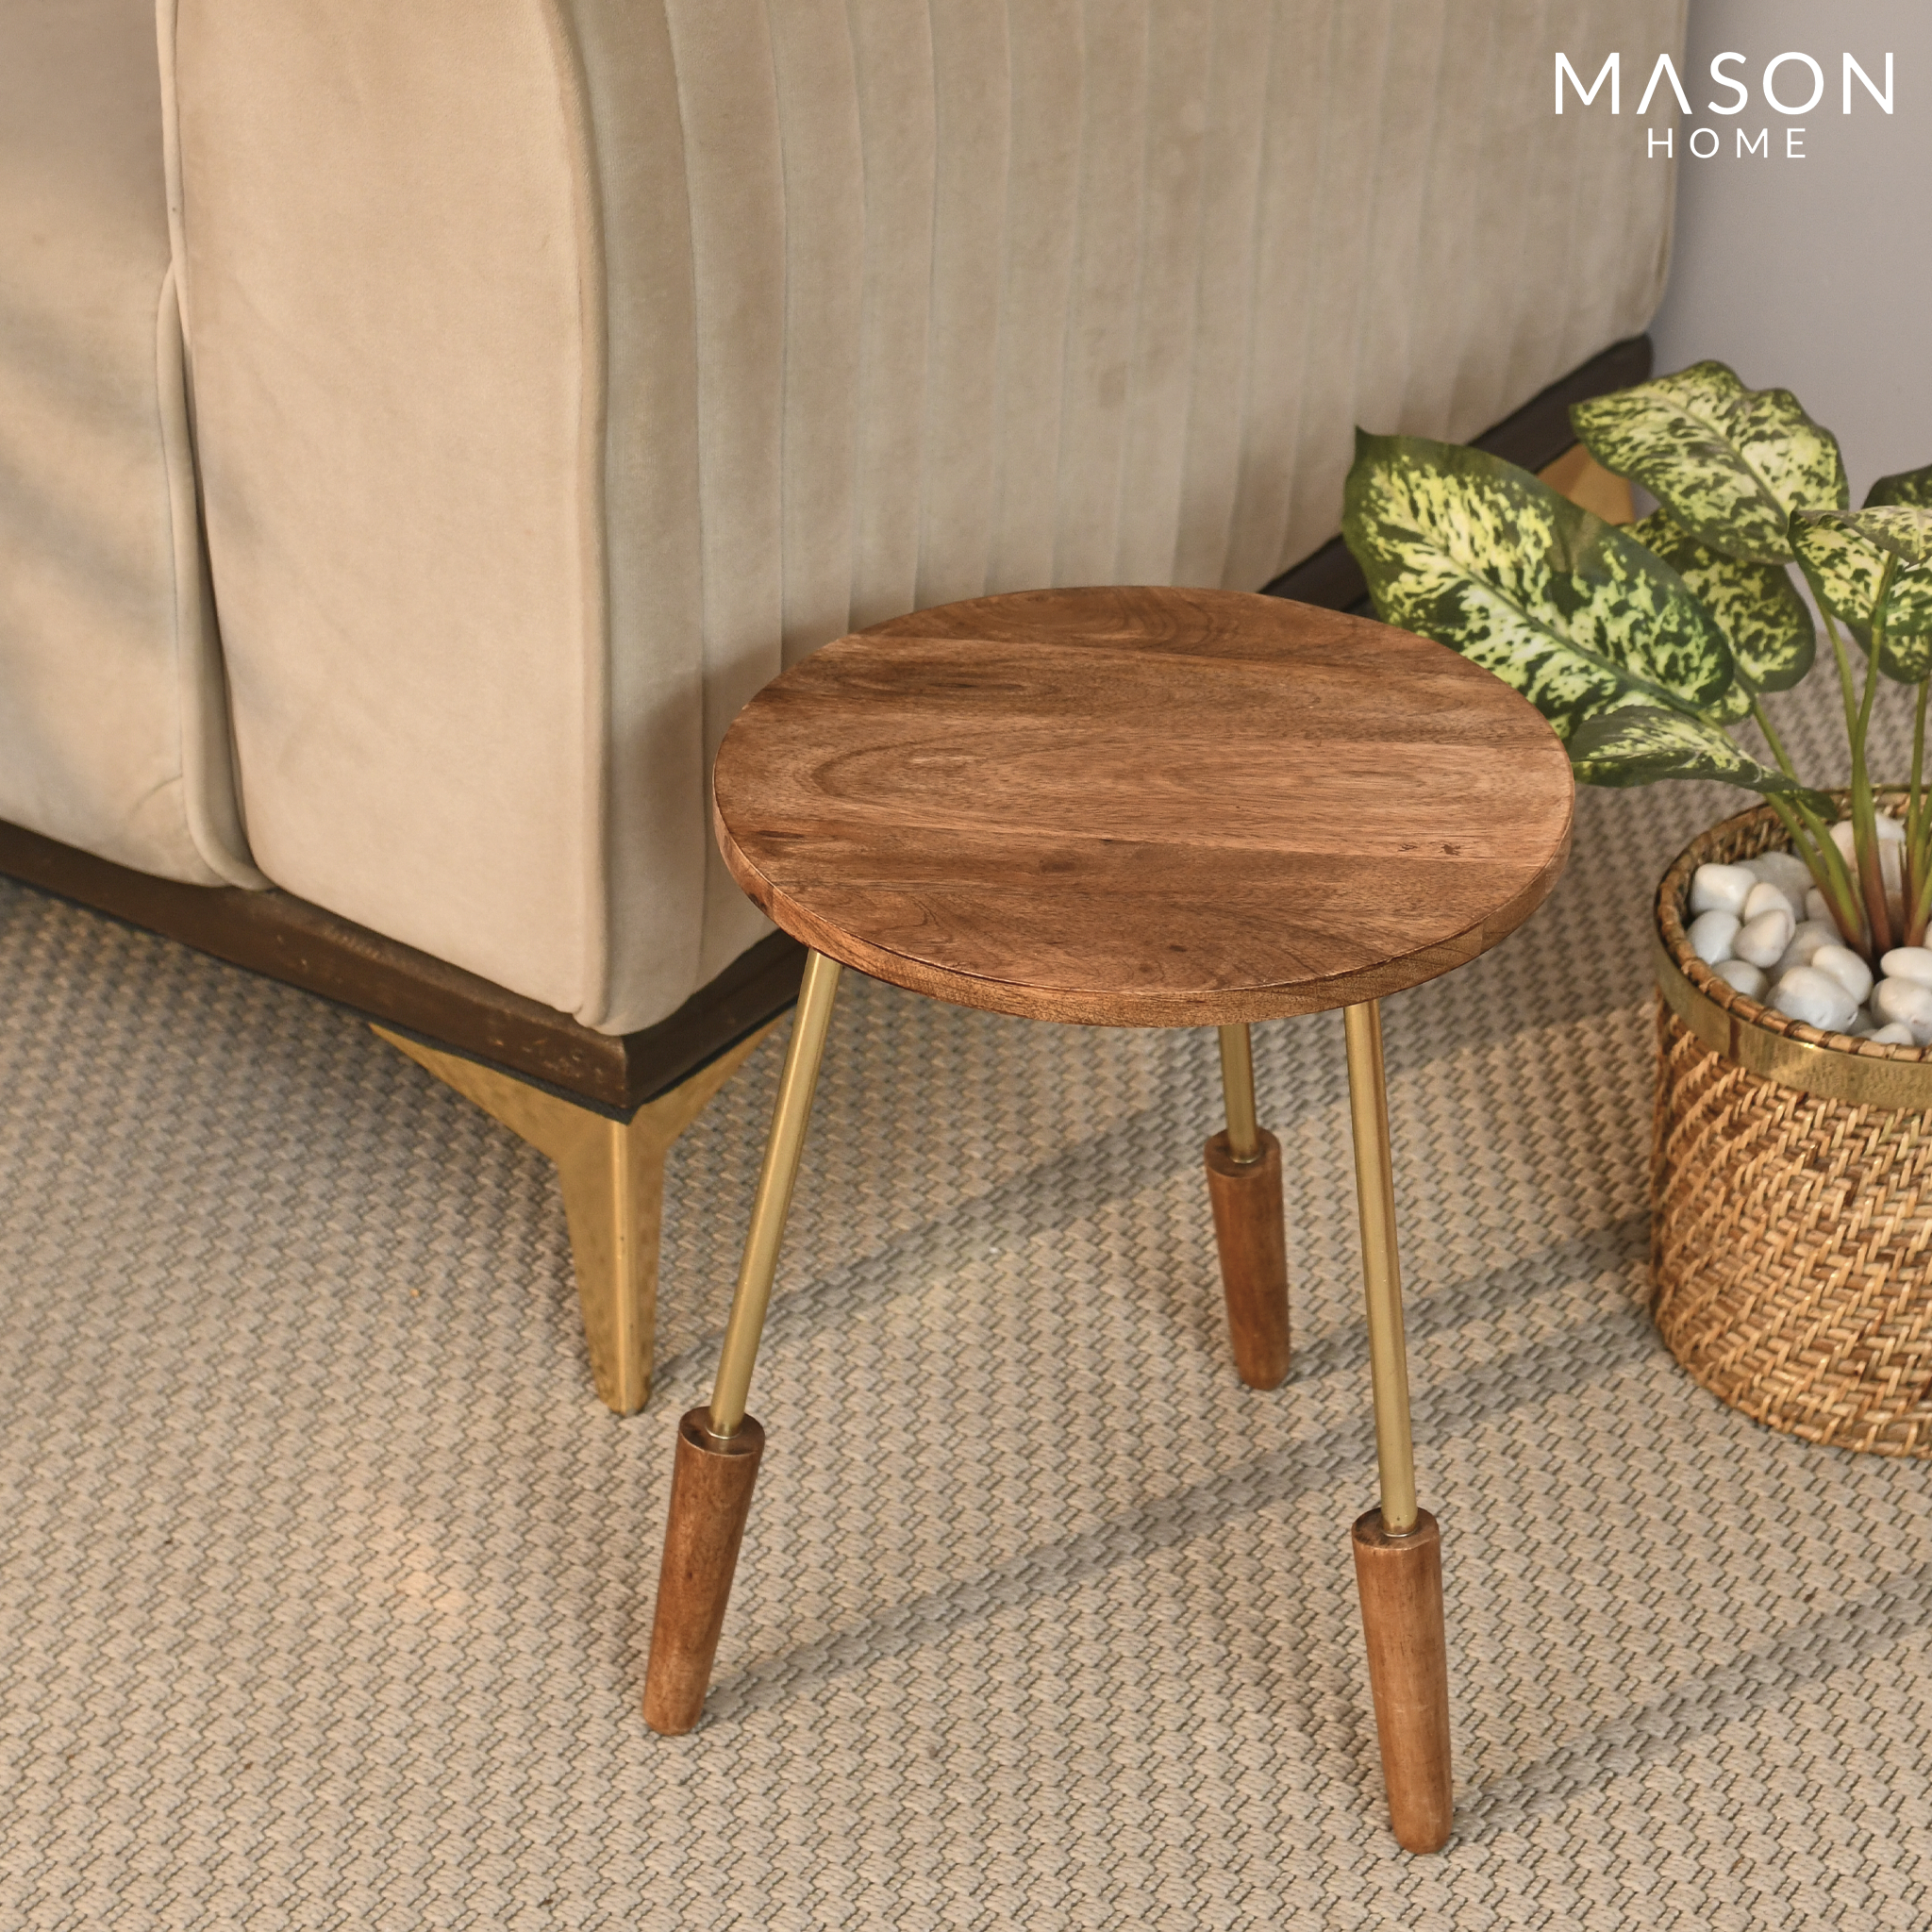 FOLDING TABLES FOR TIGHT SPACES – Mason Home by Amarsons